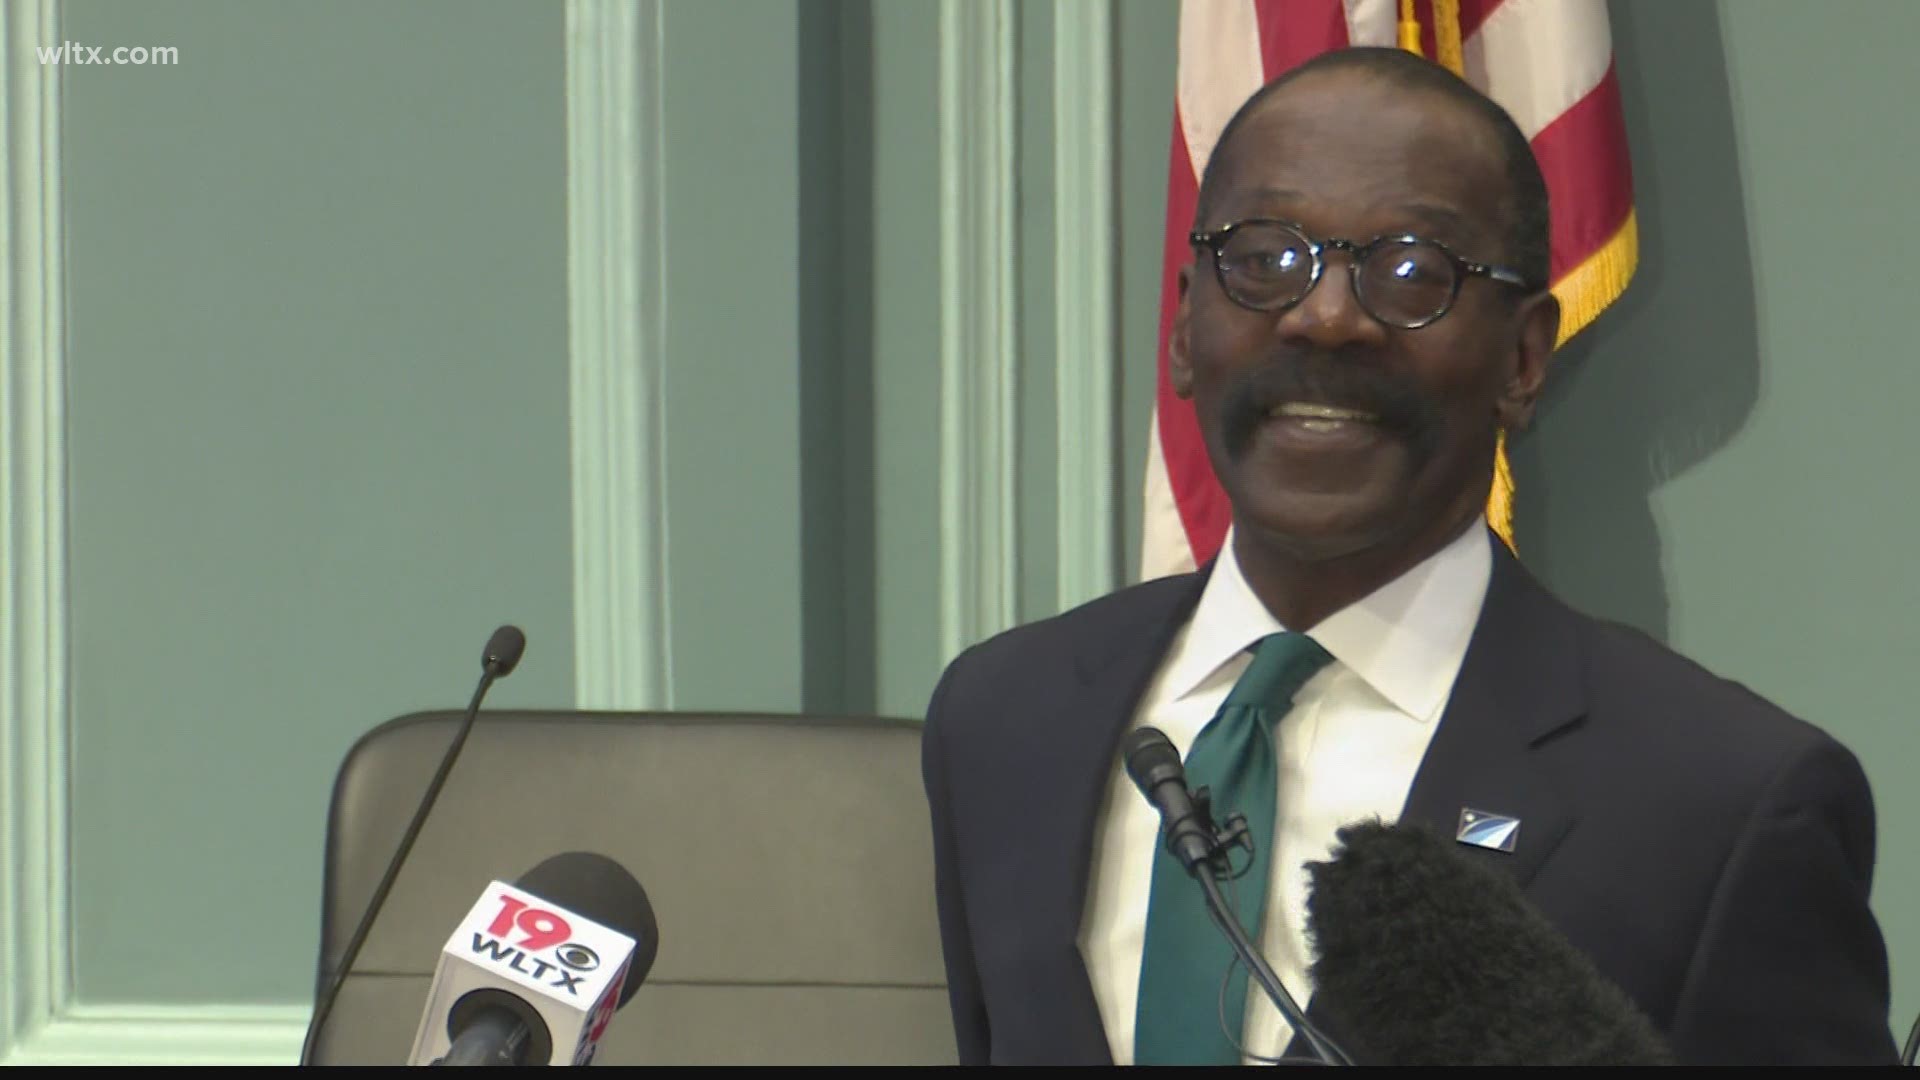 Sam Davis said he will not seek re-election when his term expires.